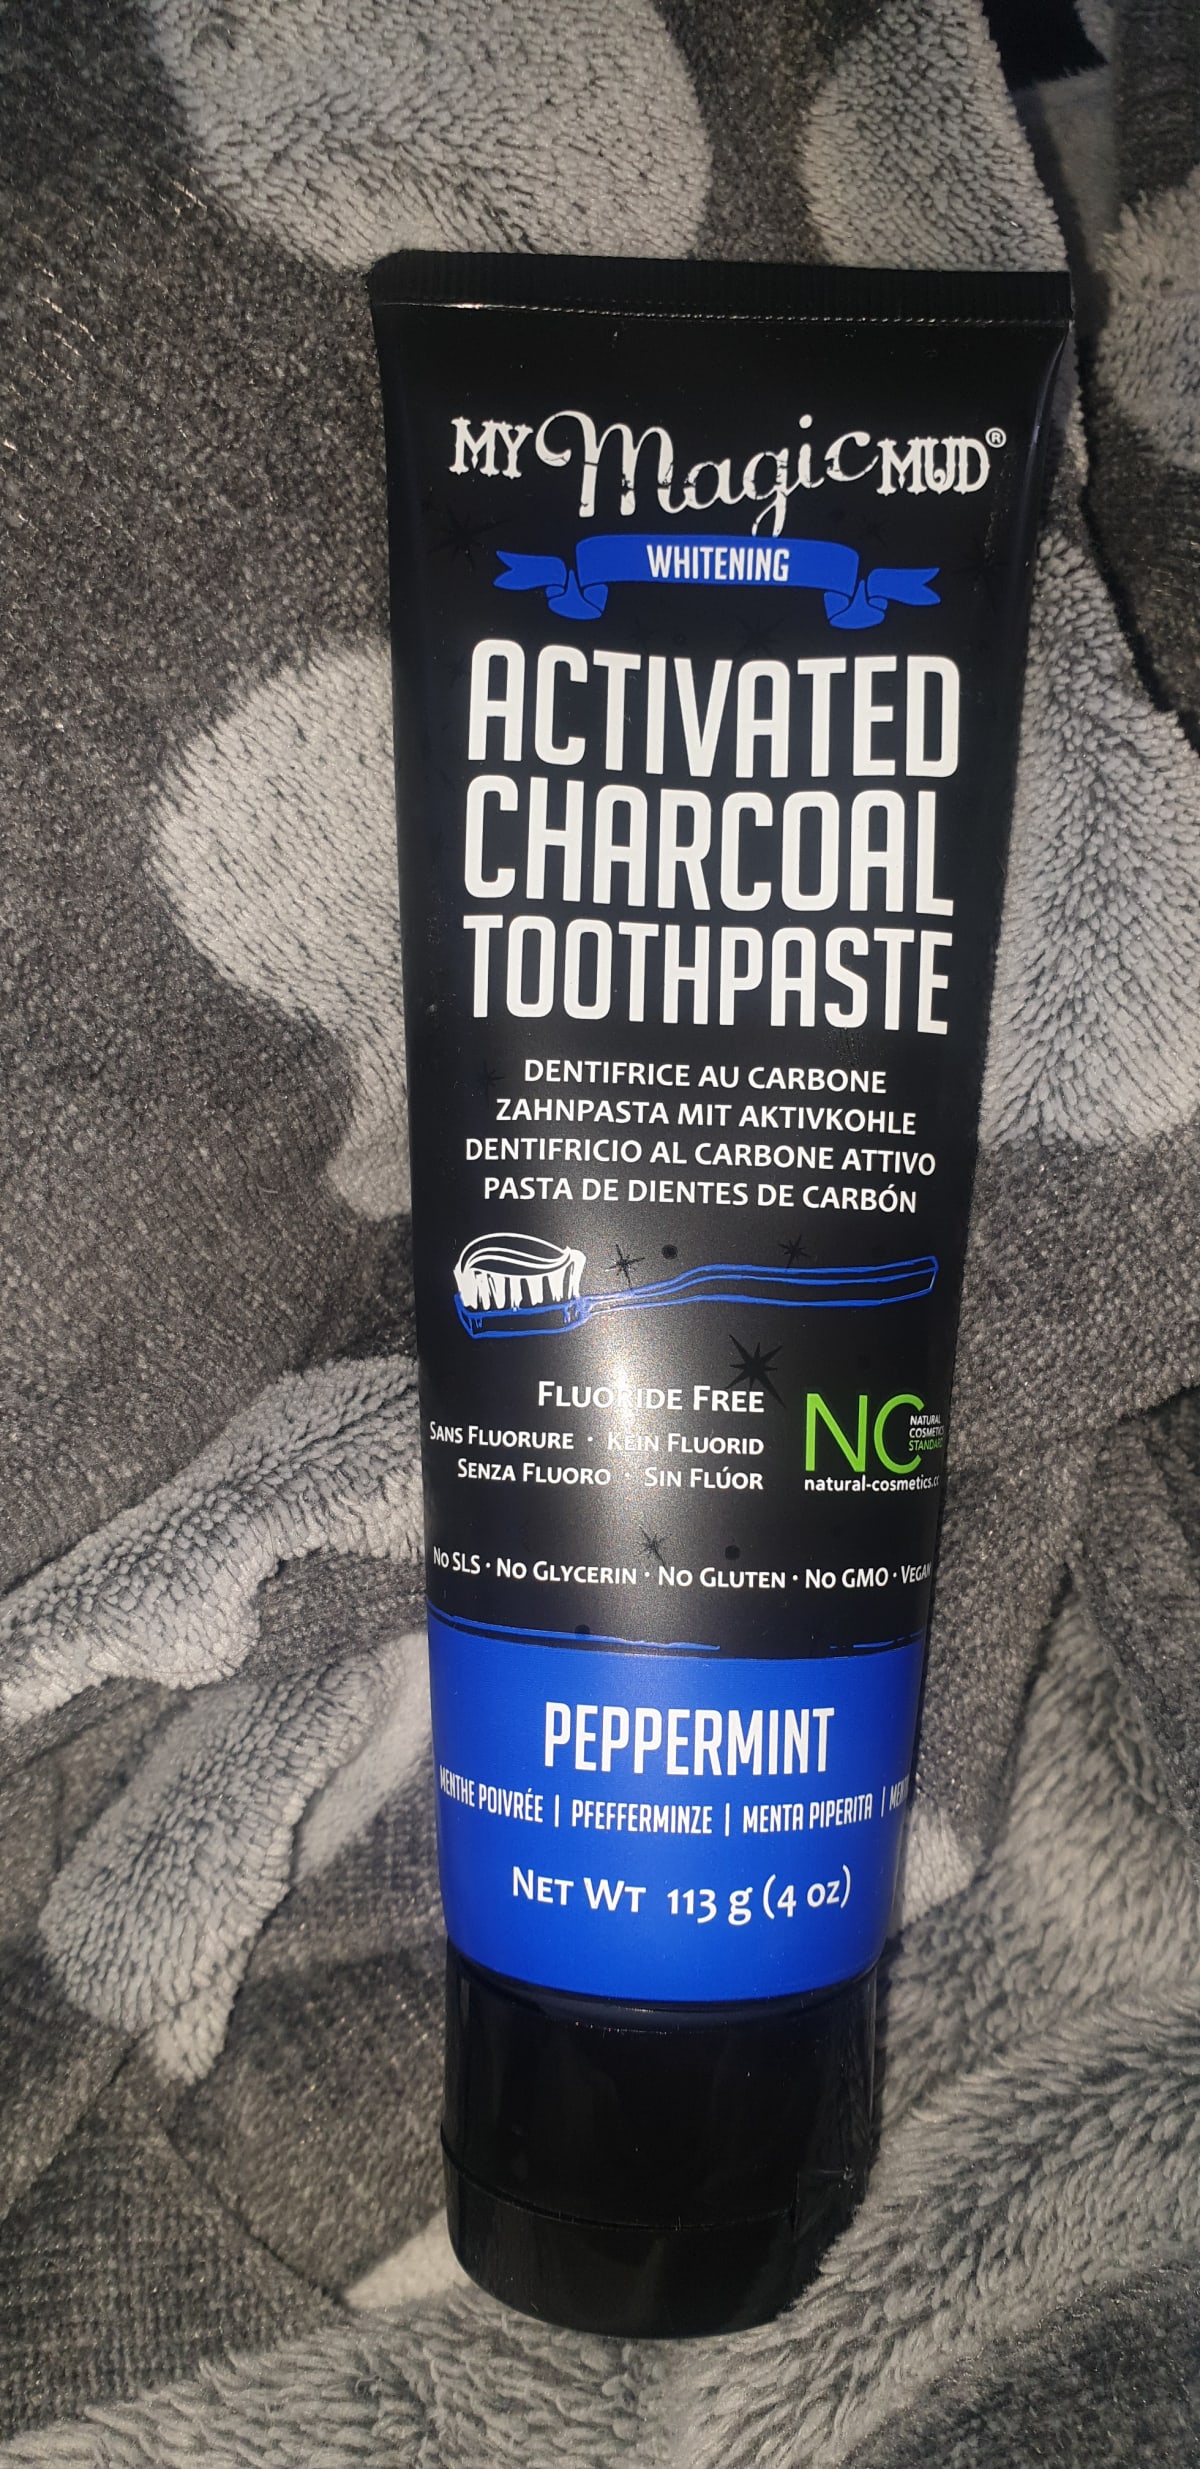 Activated Carbon Tandpasta (Charcoal Toothpaste Peppermint) - review image